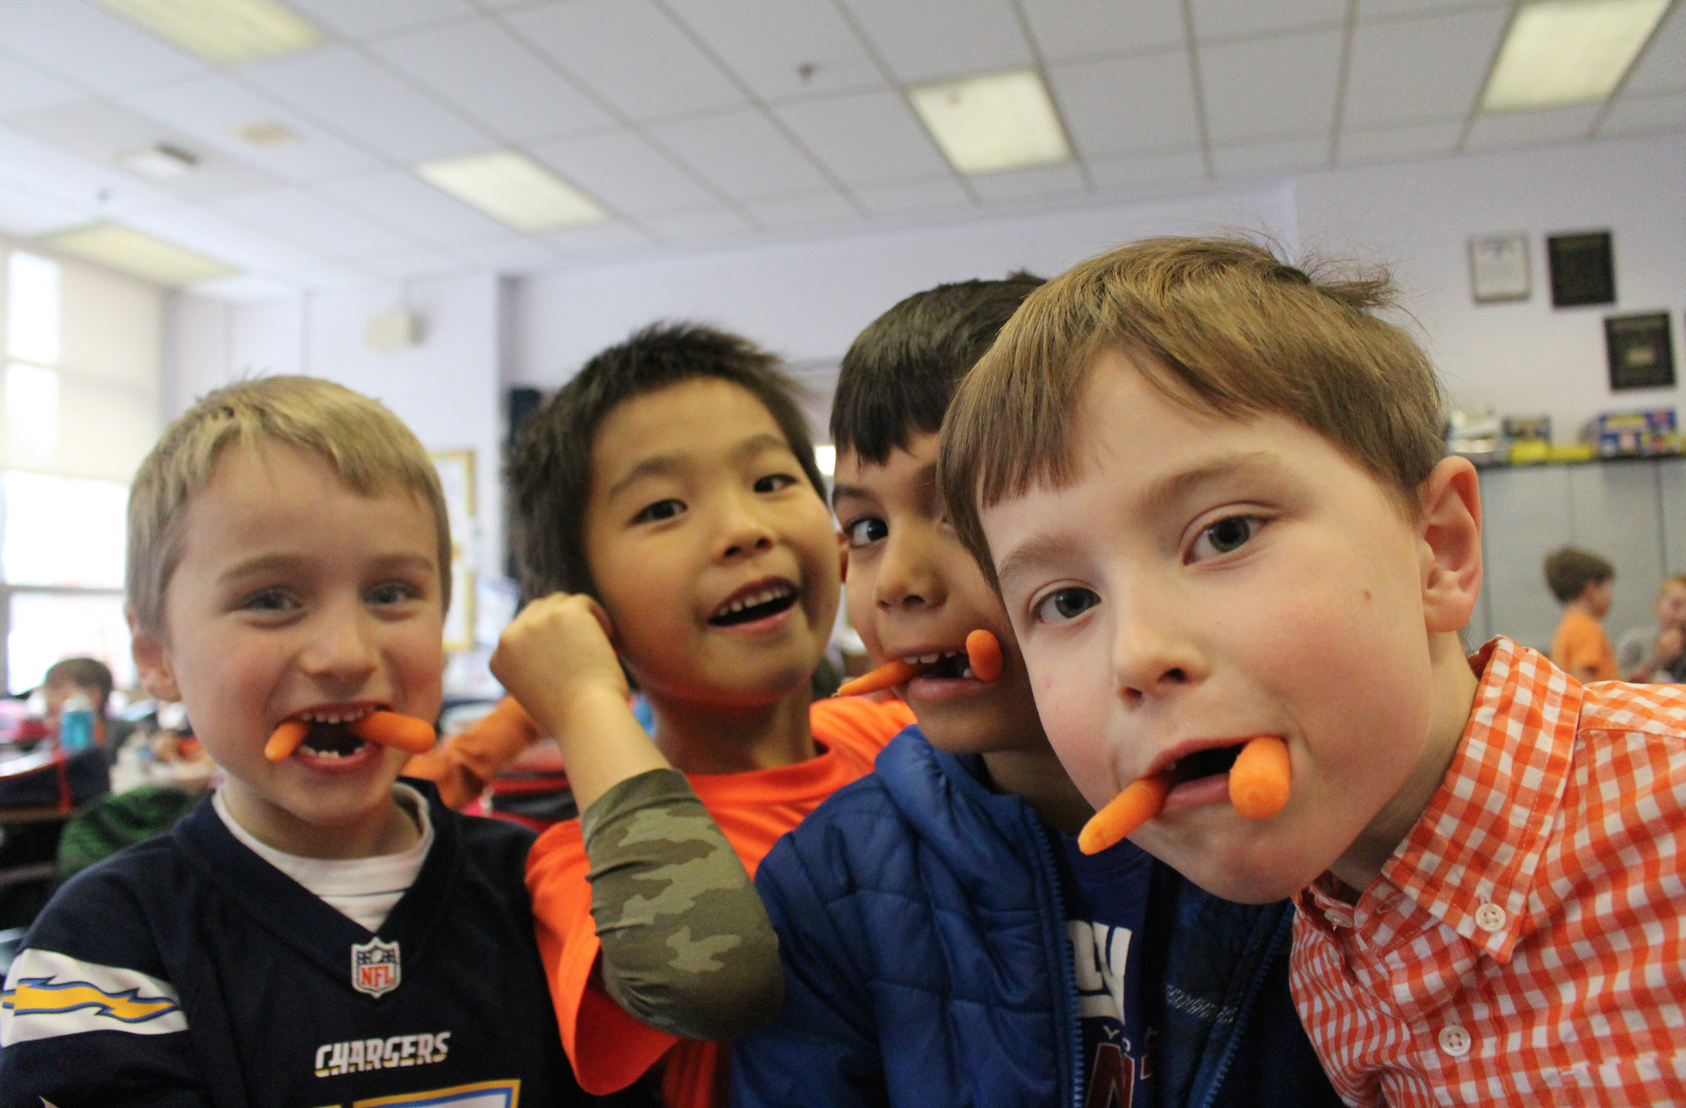     Play a little.Eat a little. Baby carrots are delicious and fun at North Mianus School, Jan. 26, 2016 Credit: Leslie Yager